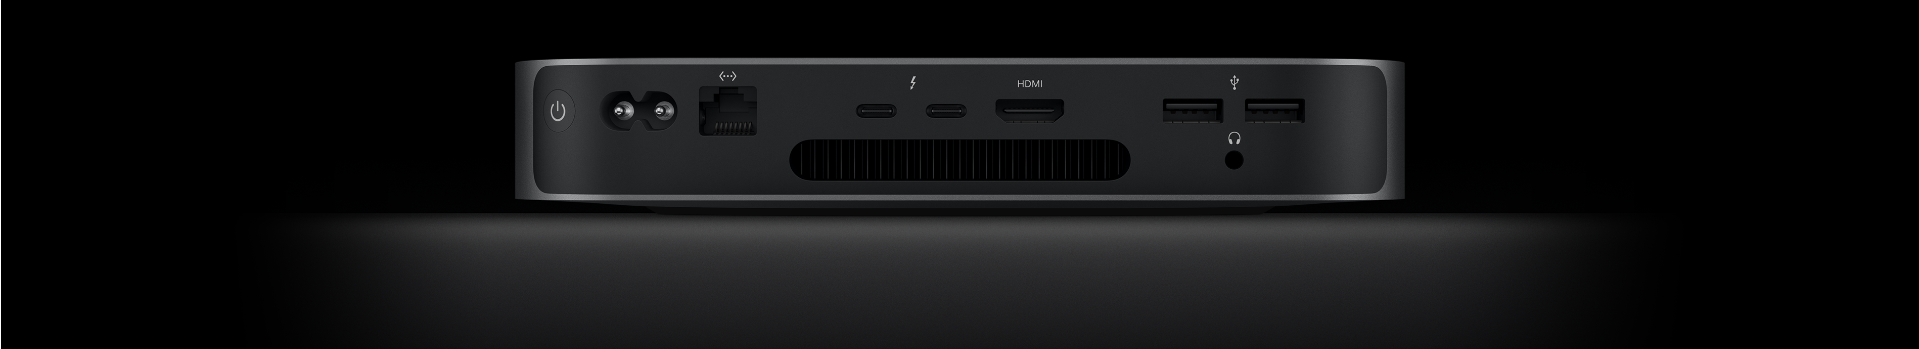 Back view of Mac mini showing the two Thunderbolt 4 ports, HDMI port, two USB-A ports, headphone jack, Gigabit Ethernet port, power port and power button.